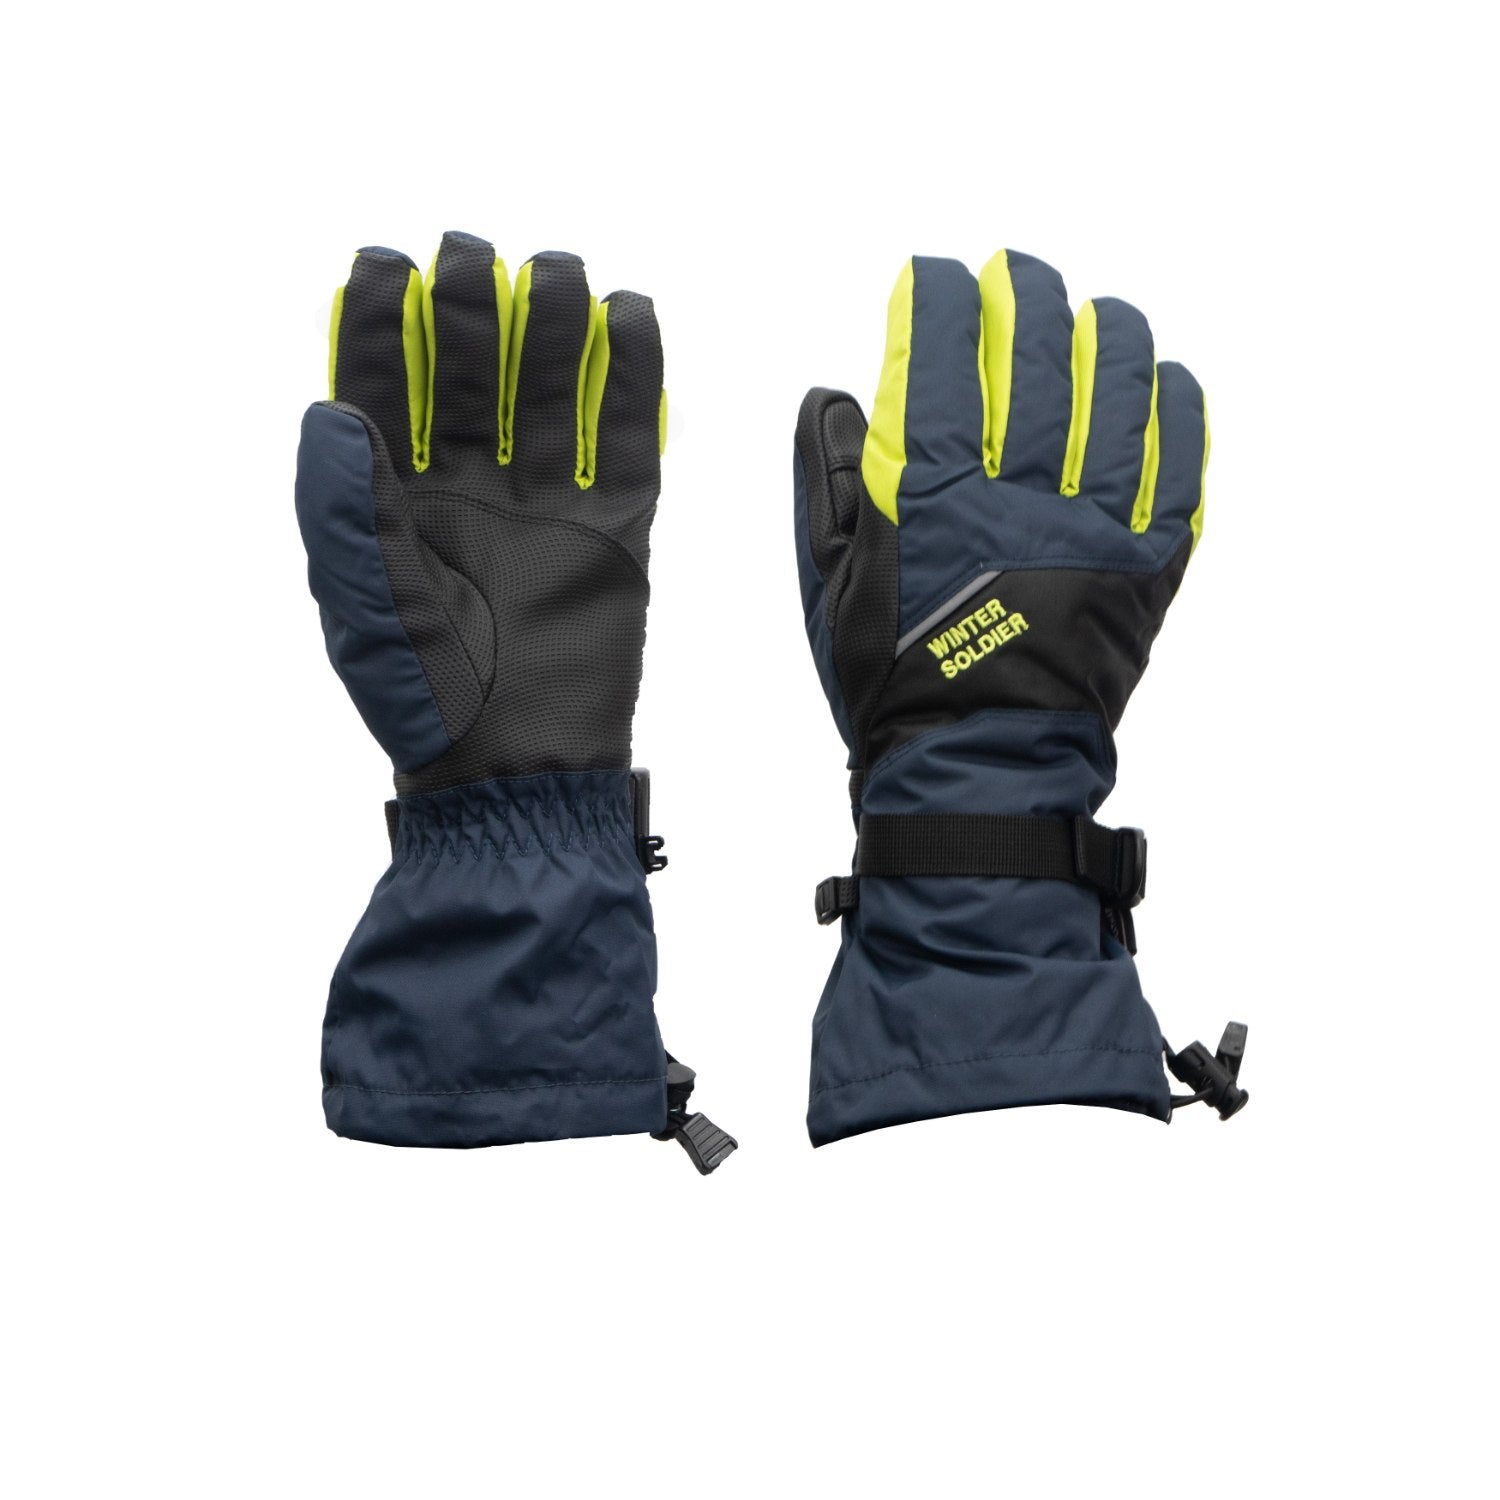 Buy Gokyo K2 Extreme Cold Weather Gloves | Cold Weather Gloves at Gokyo Outdoor Clothing & Gear